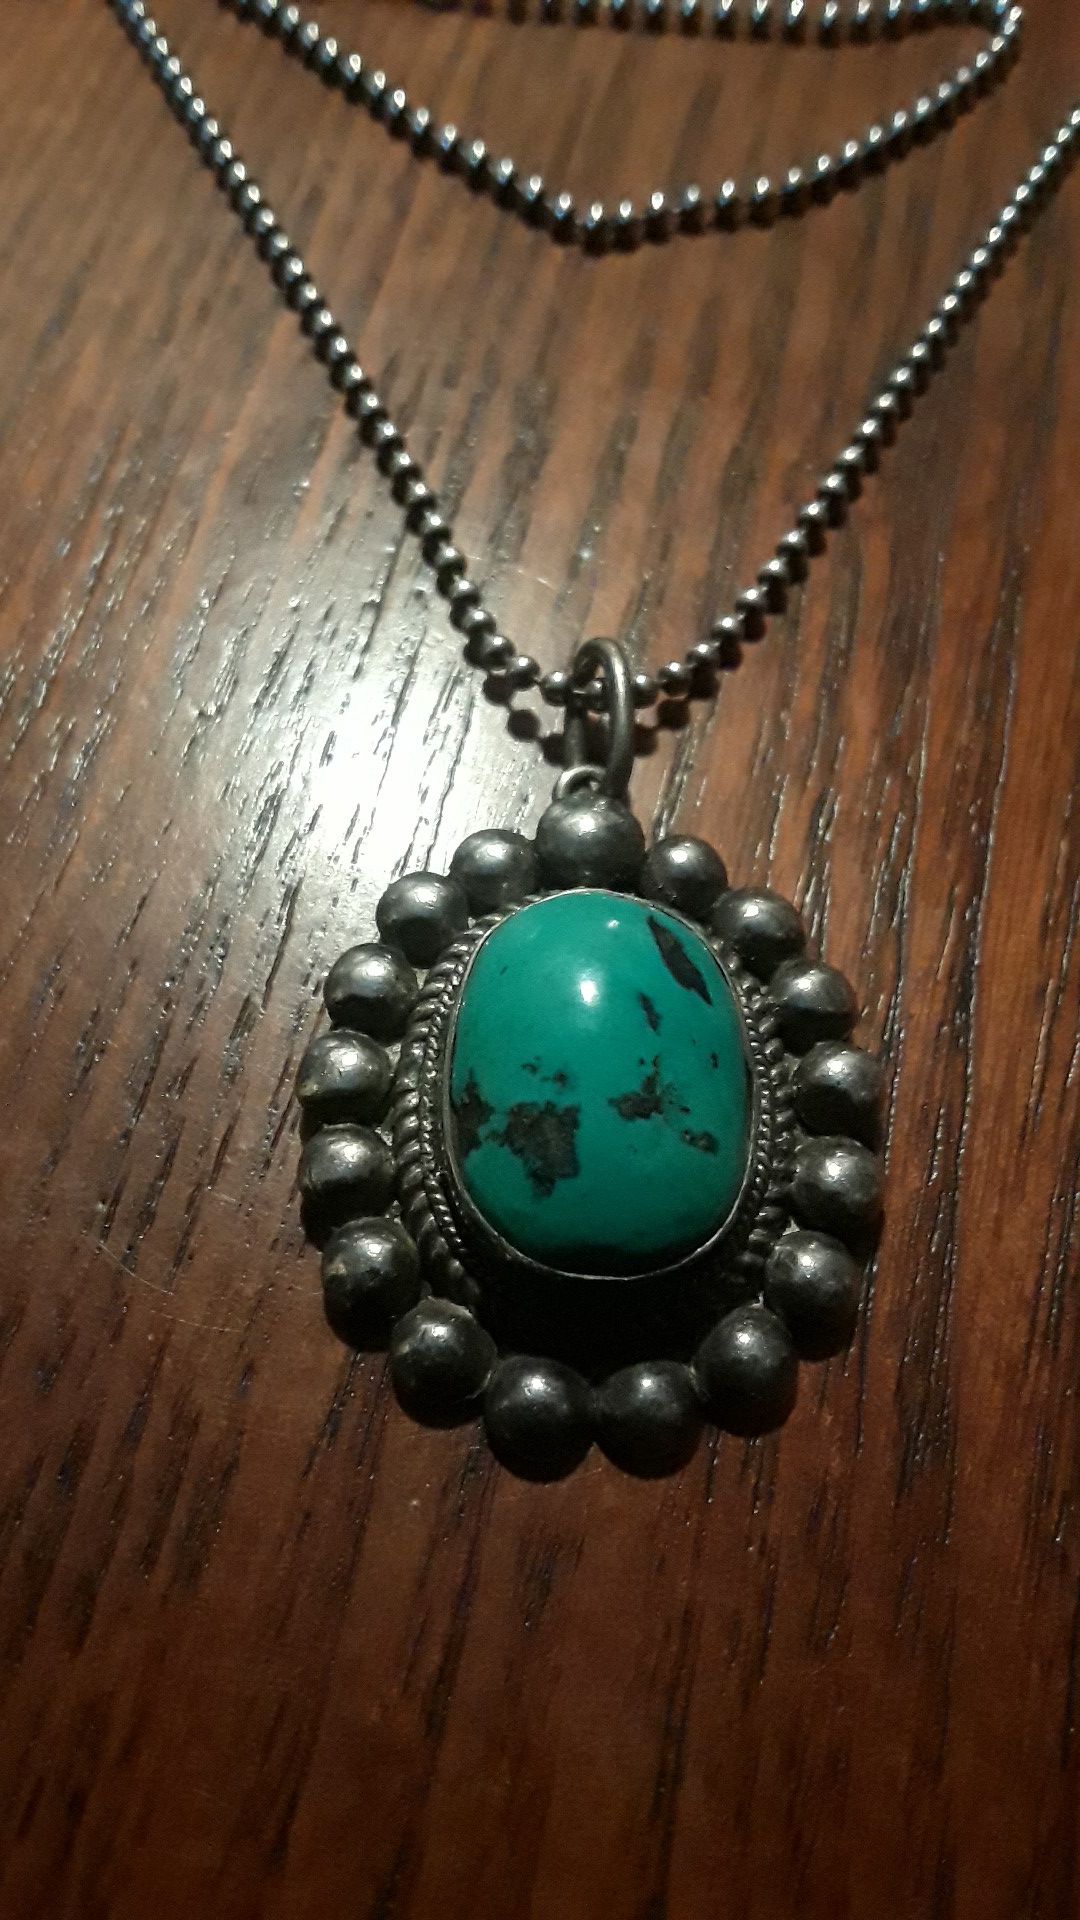 Absolutely Gorgeous Sterling Silver 925 Turquoise stone pendant with necklace.